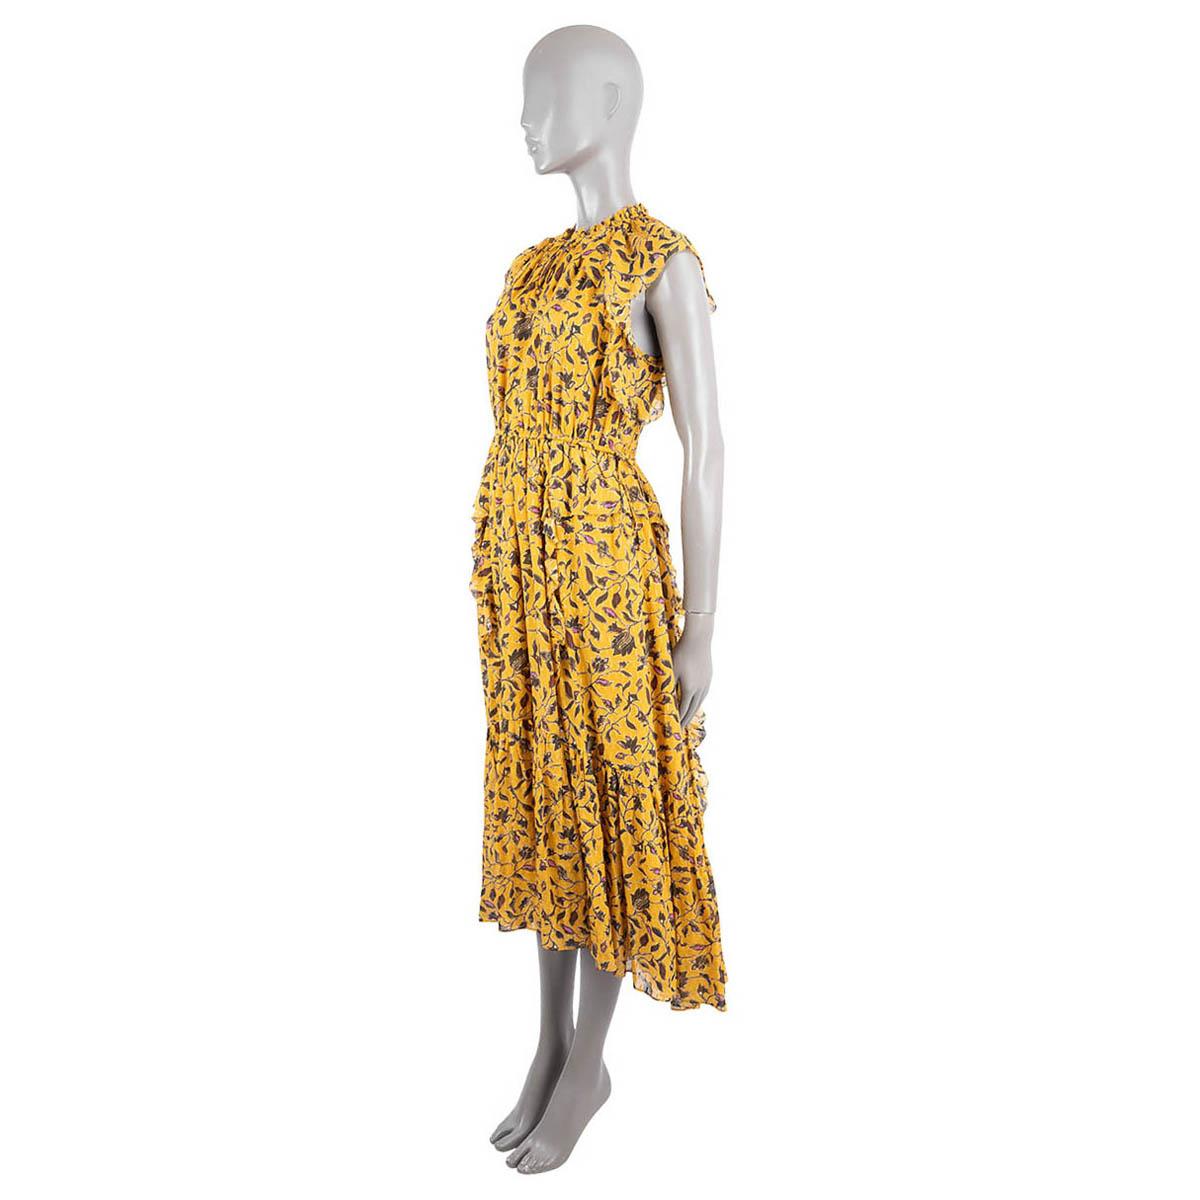 100% authentic Ulla Johnson Dania midi dress in mustard silk georgette (70%), cotton (27%) and lurex (3%) with vine floral print. Features a V-neck, elastic waistband, asymmetric ruffled details with self-tie shoulder and a handkerchief hem. Lined